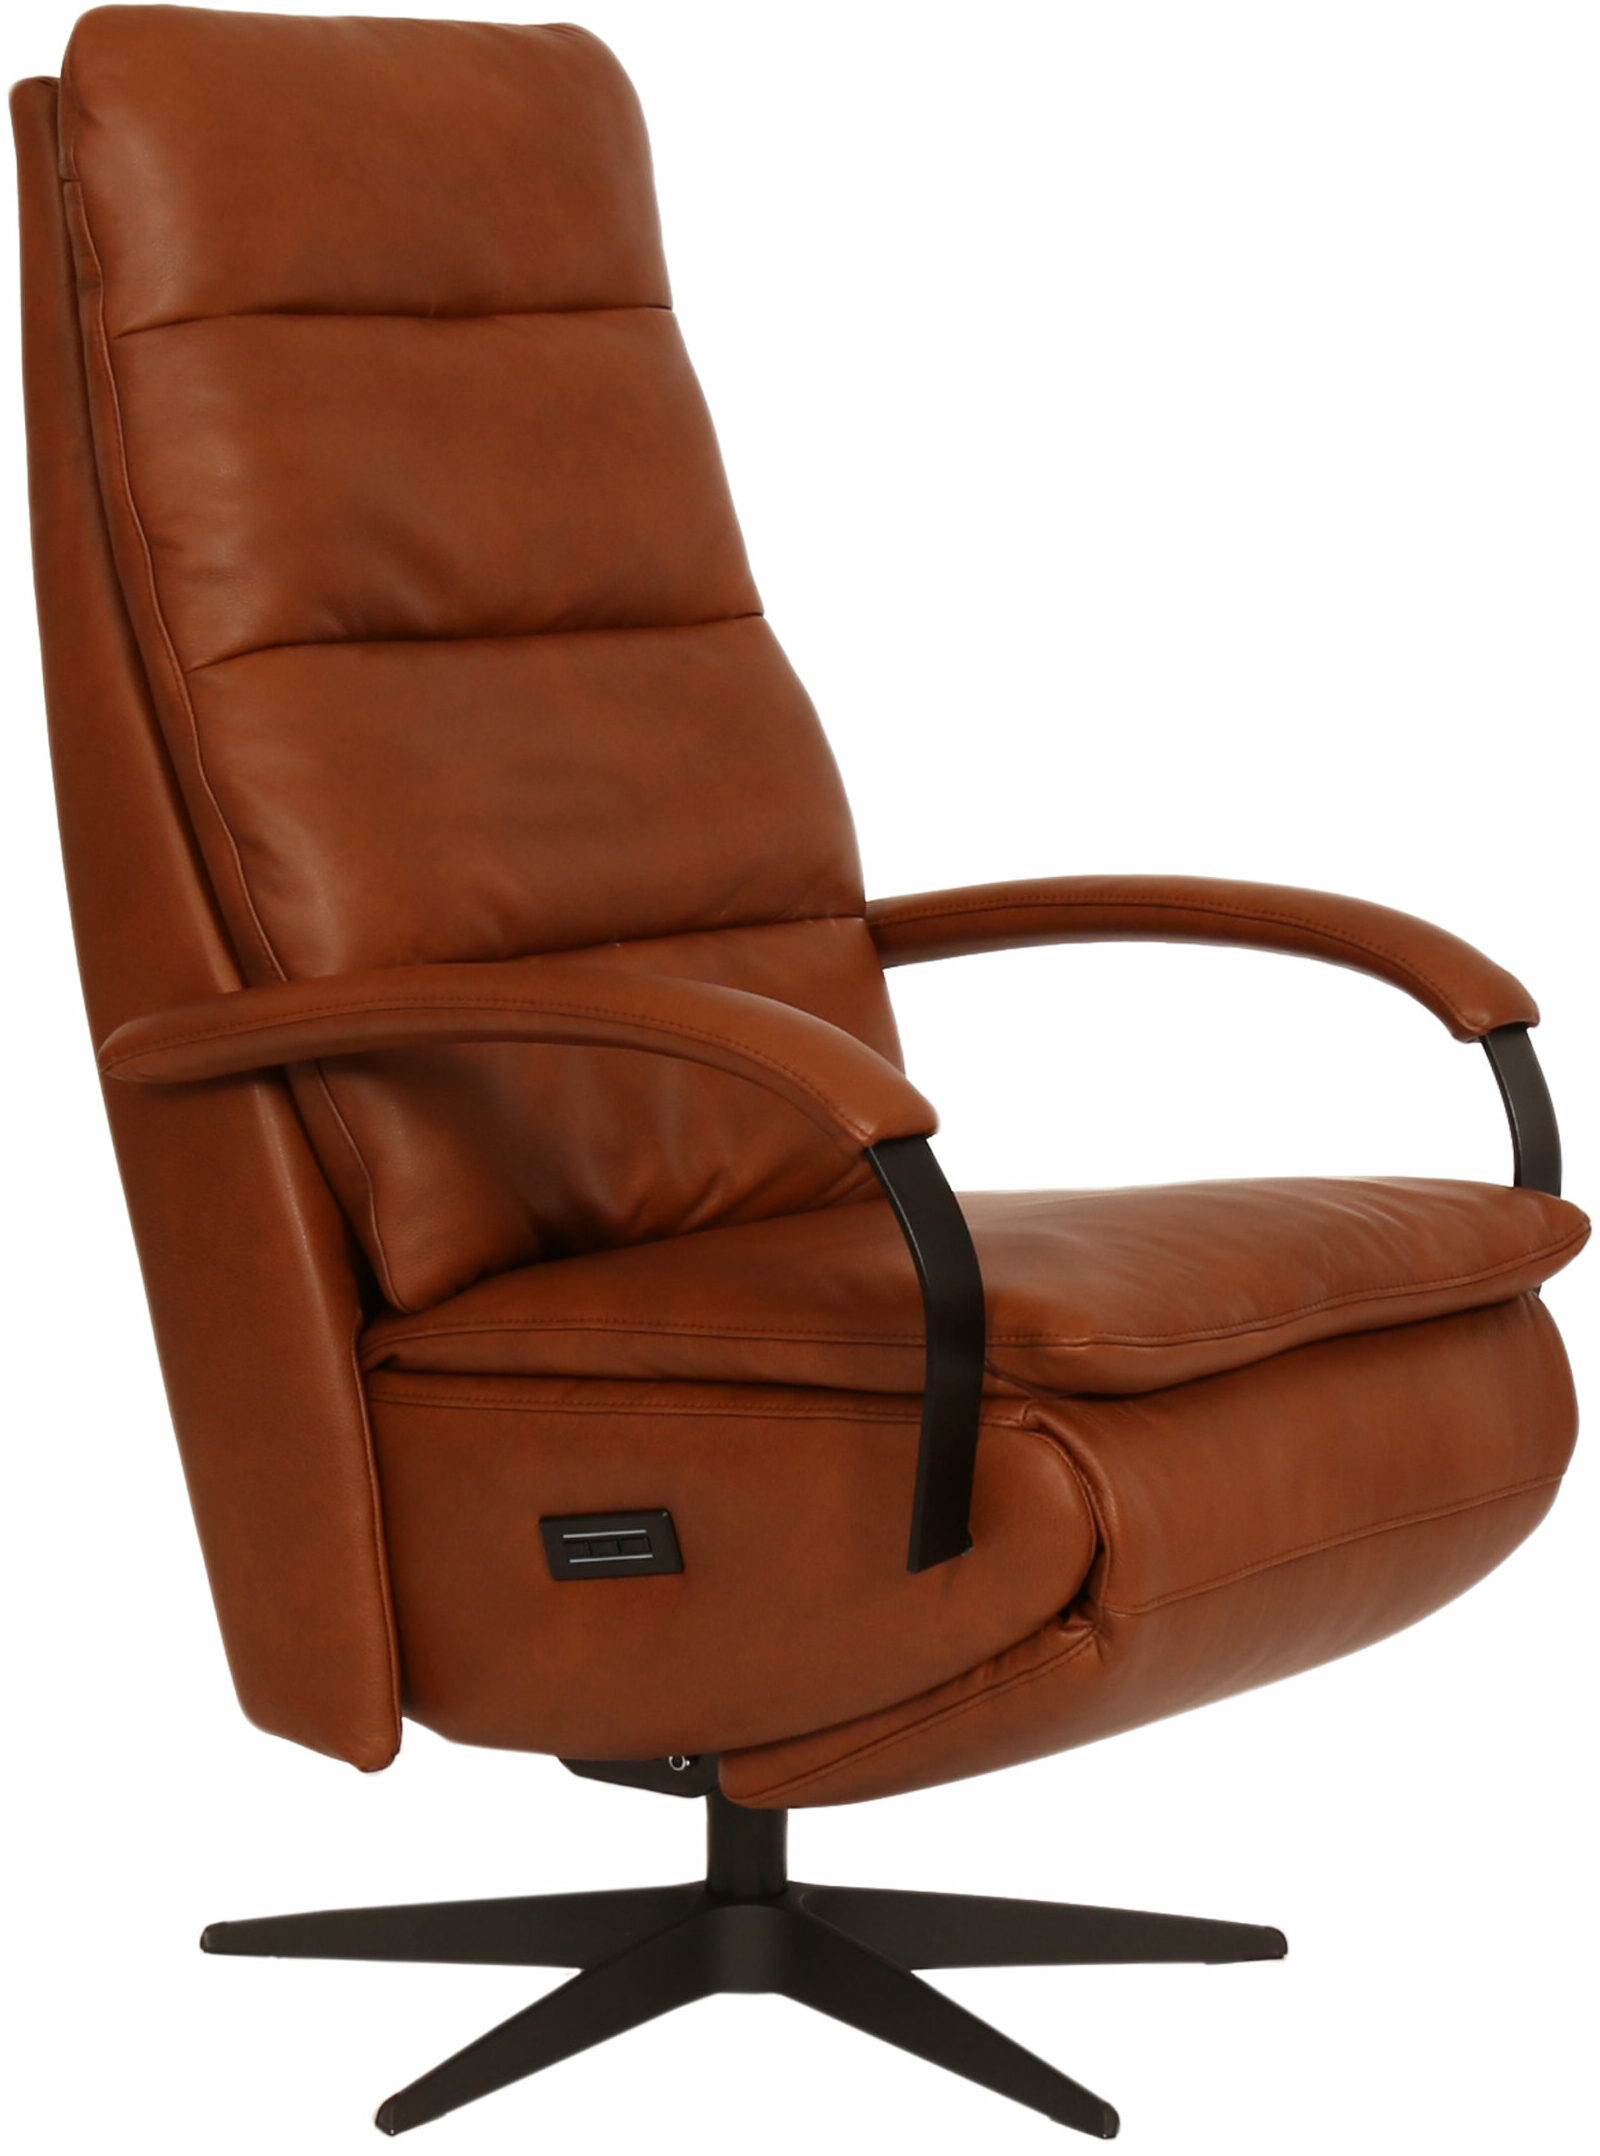 Twinz 231 relaxfauteuil